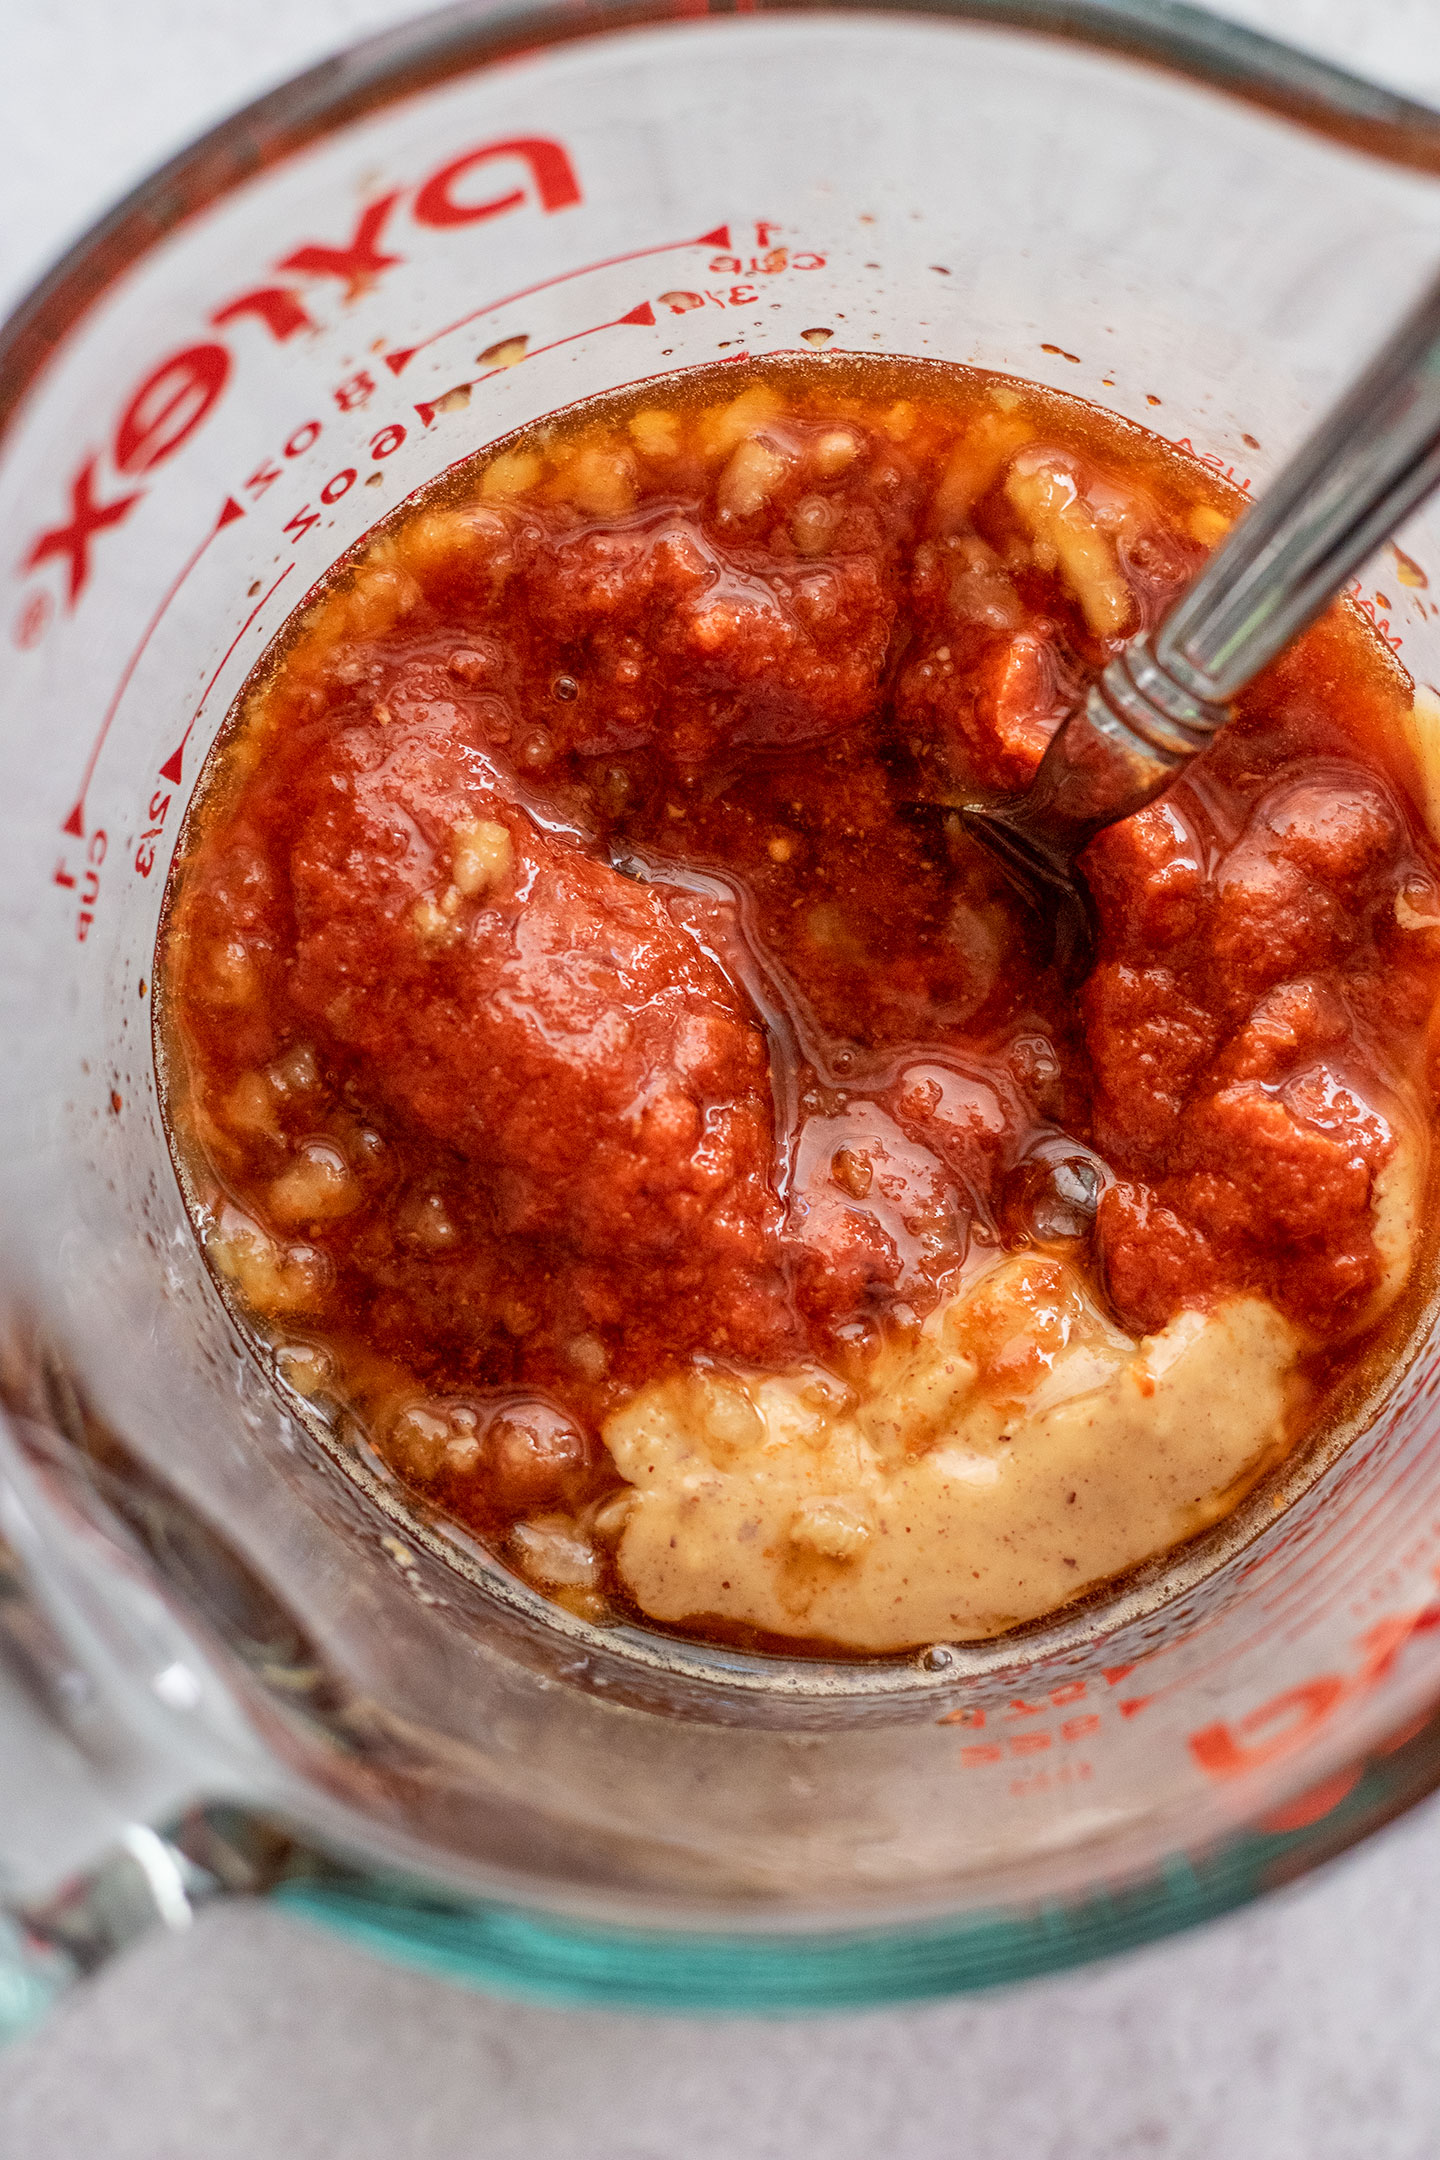 Mixing peanut butter and red curry paste together in a glass measuring cup.